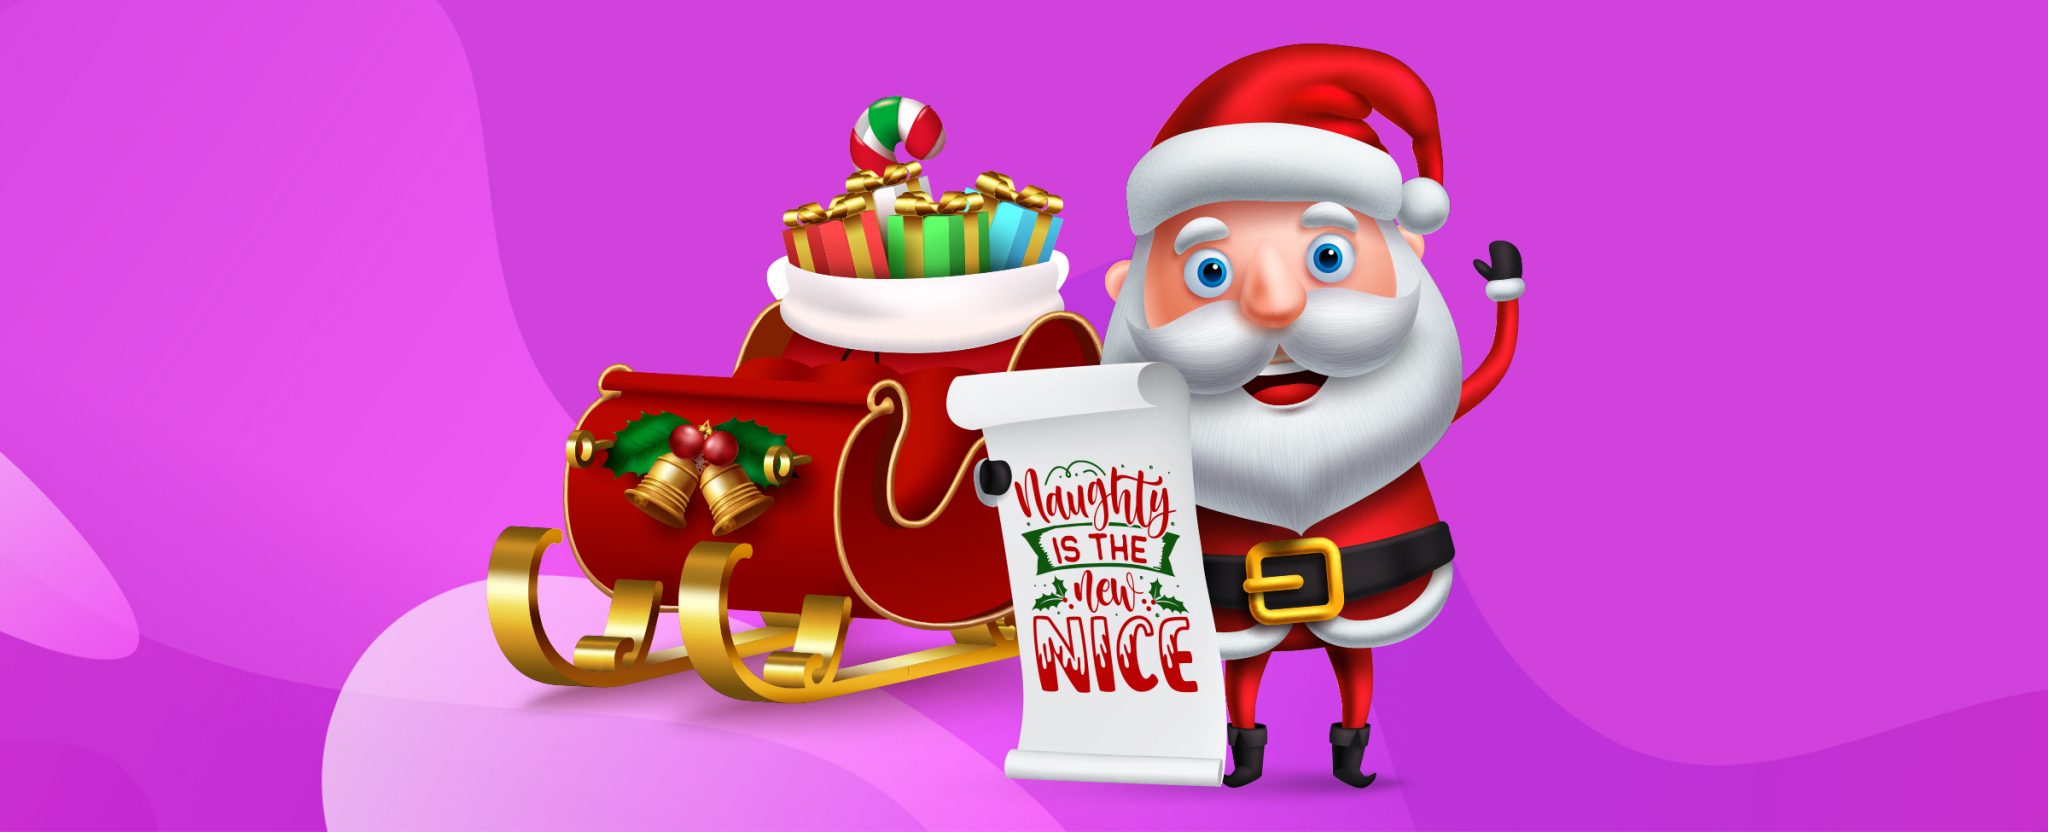 3D cartoon of Santa Claus holding up a scroll that reads “Naughty is the new nice”, standing in front of his sleigh filled with toys and a candy cane, against a two-tone purple background.